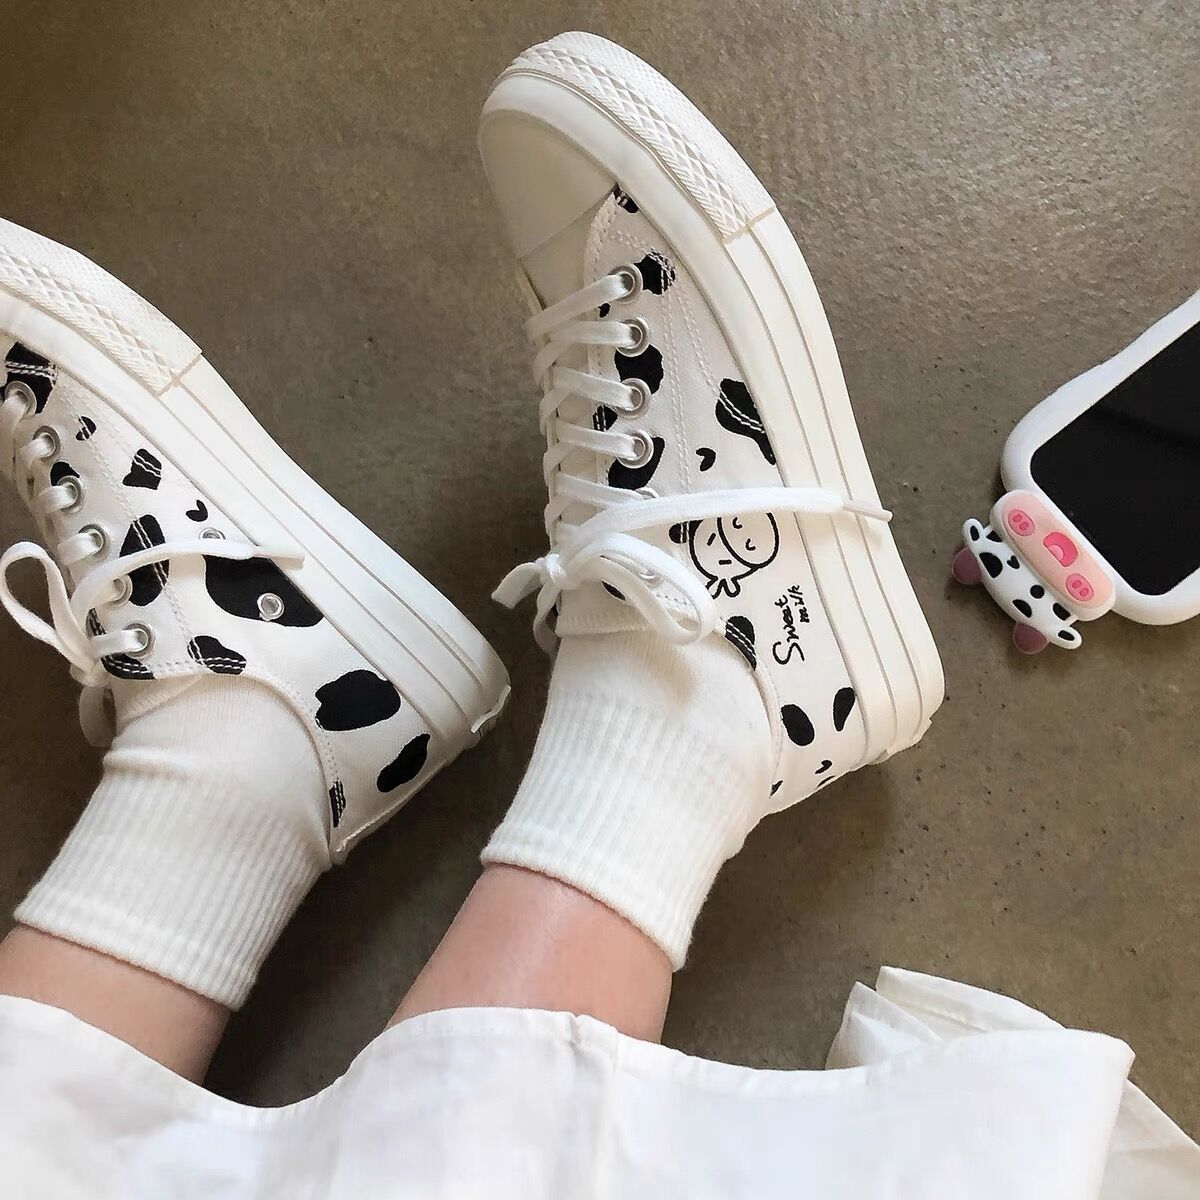 Designer Women Canvas White Sneakers Cartoon Cow Print Shoes High Top Thick Heels Sneakers Casual Running 4 - The Cow Print